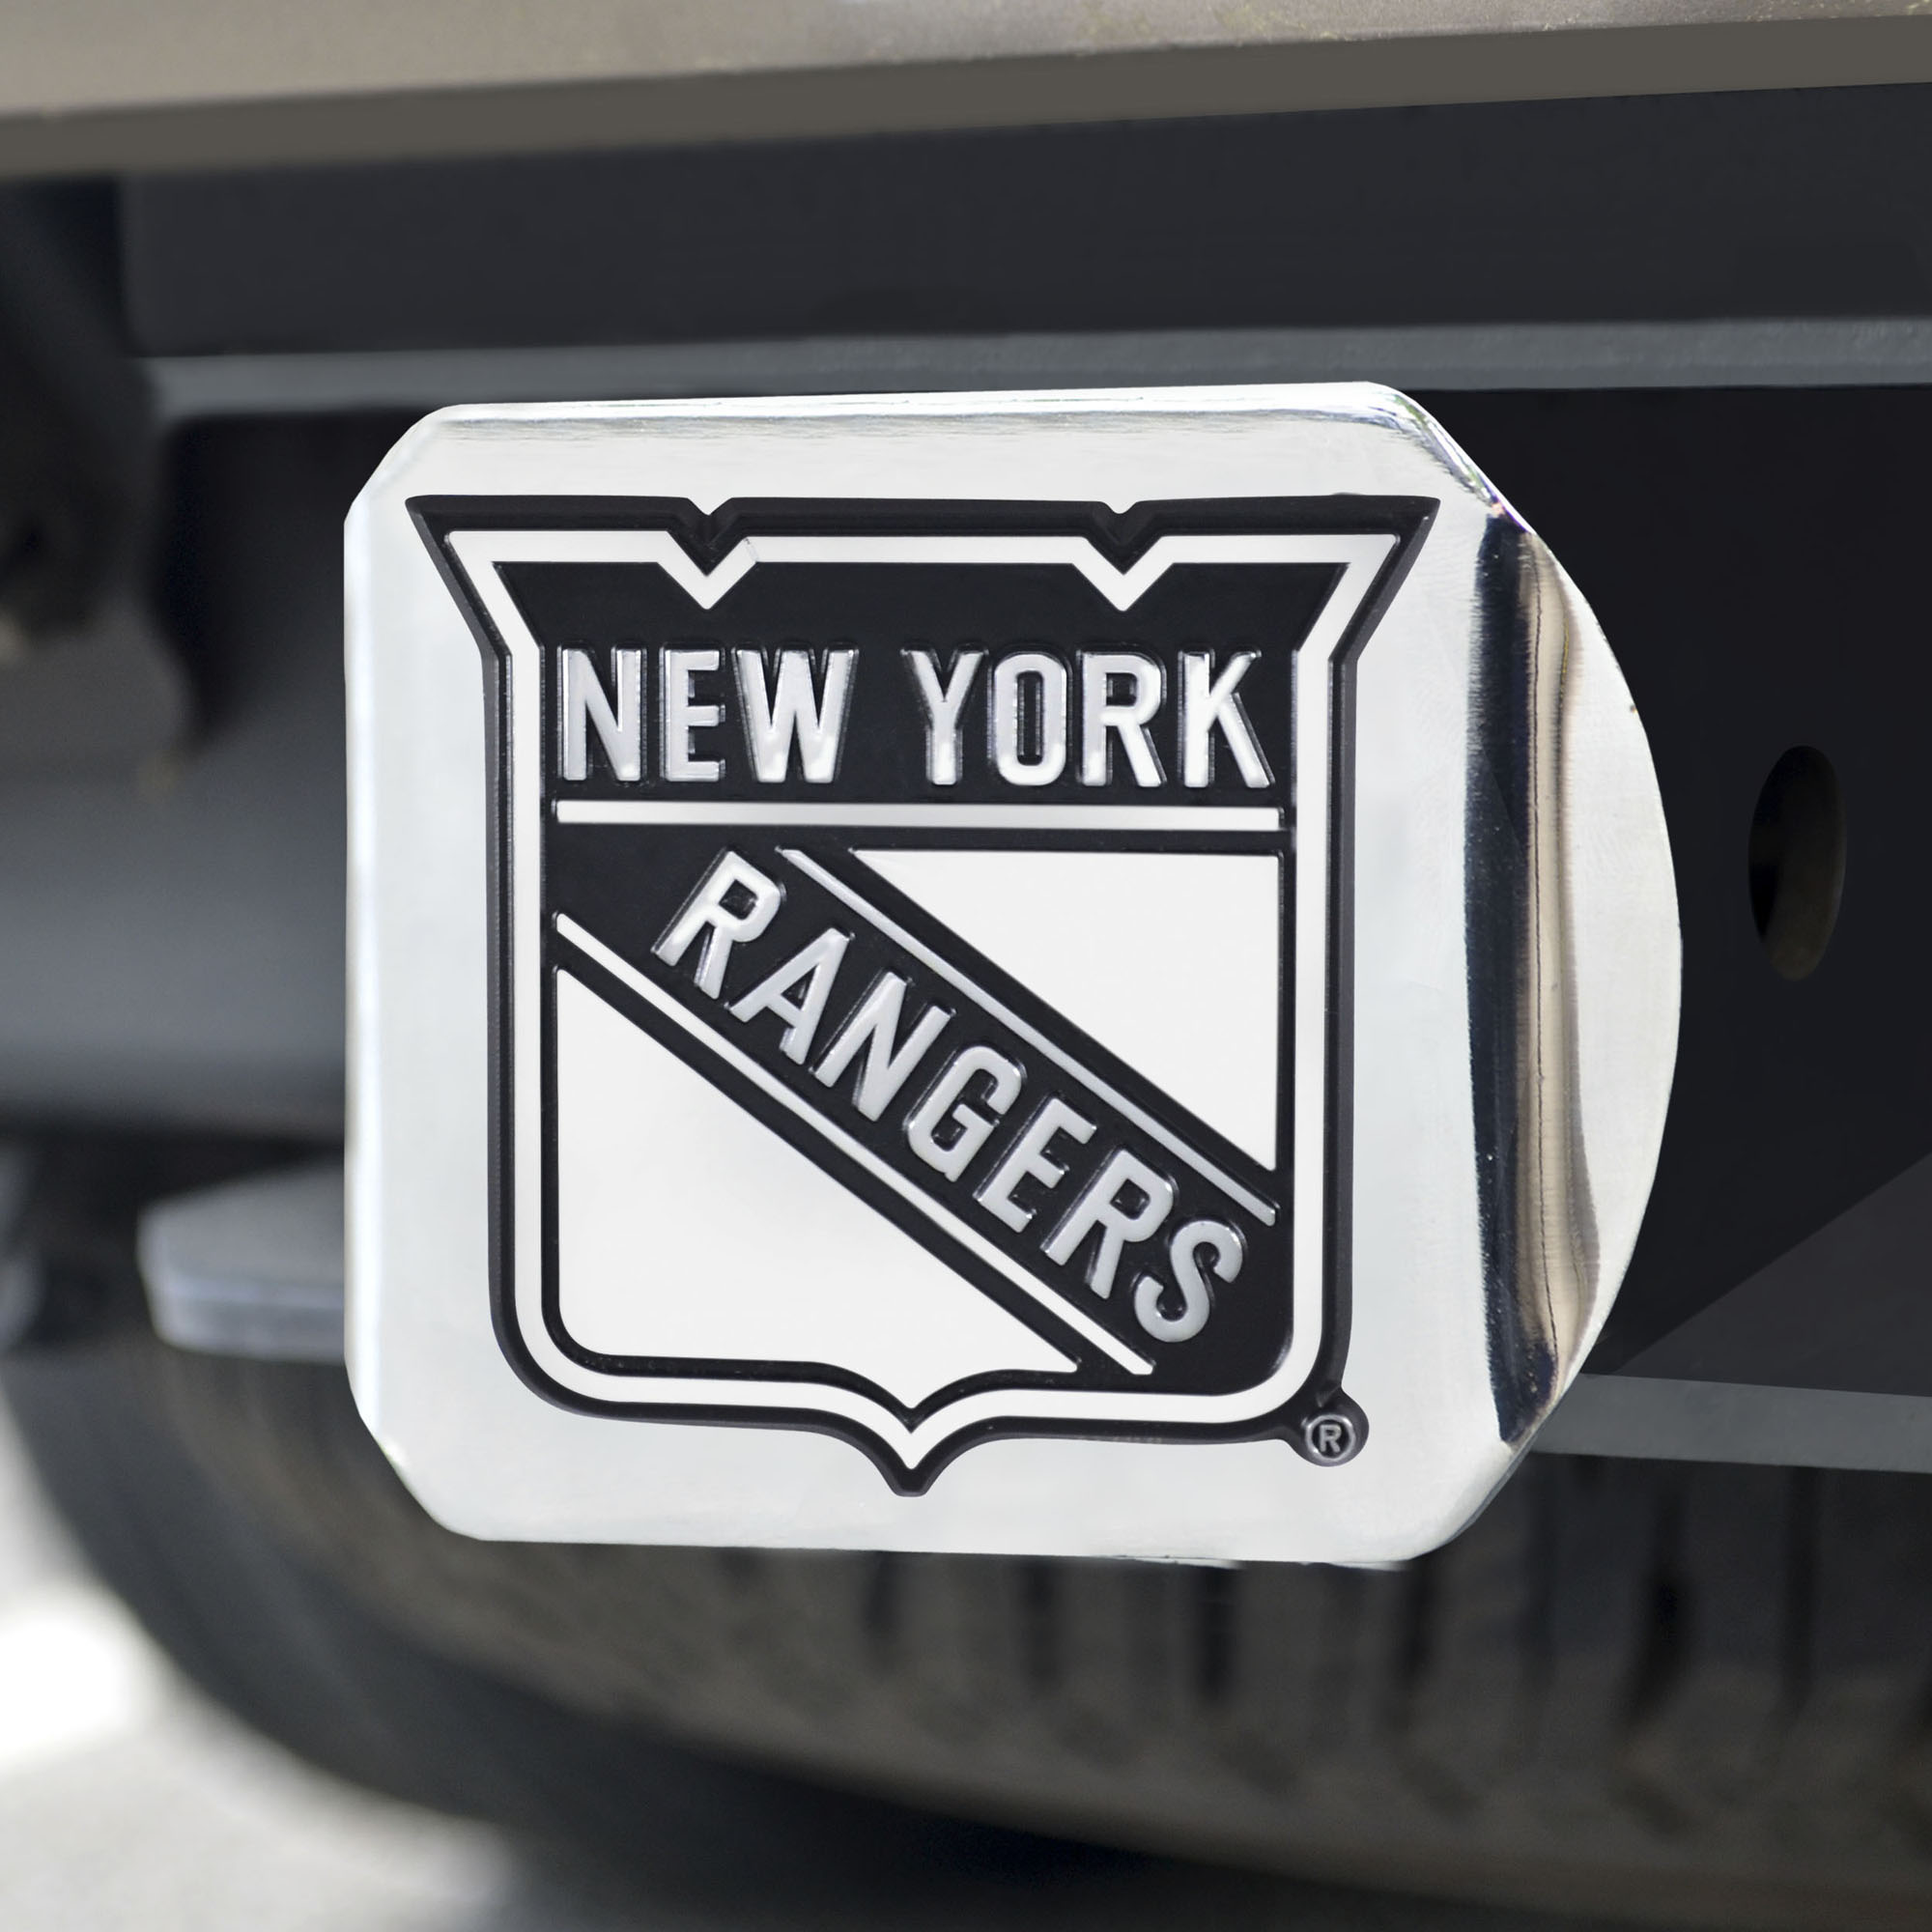 Fanmats NHL - New York Rangers Hitch Cover - 17168 - image 2 of 5